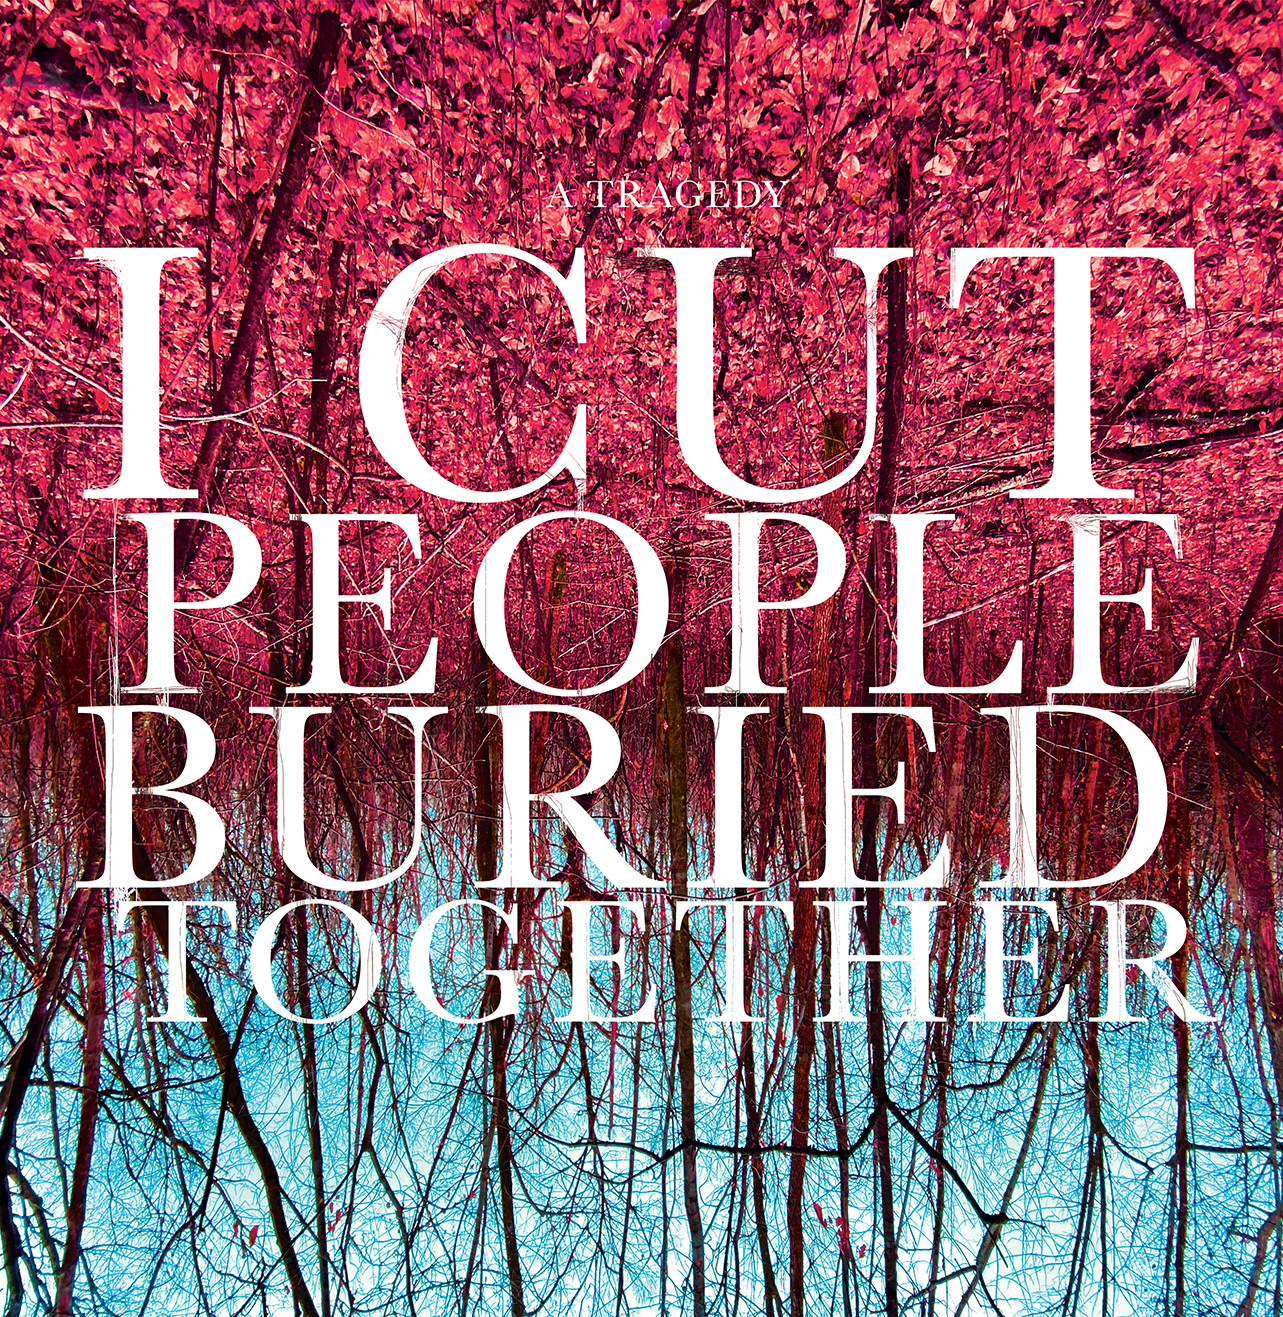 I Cut People Buried Together cover art